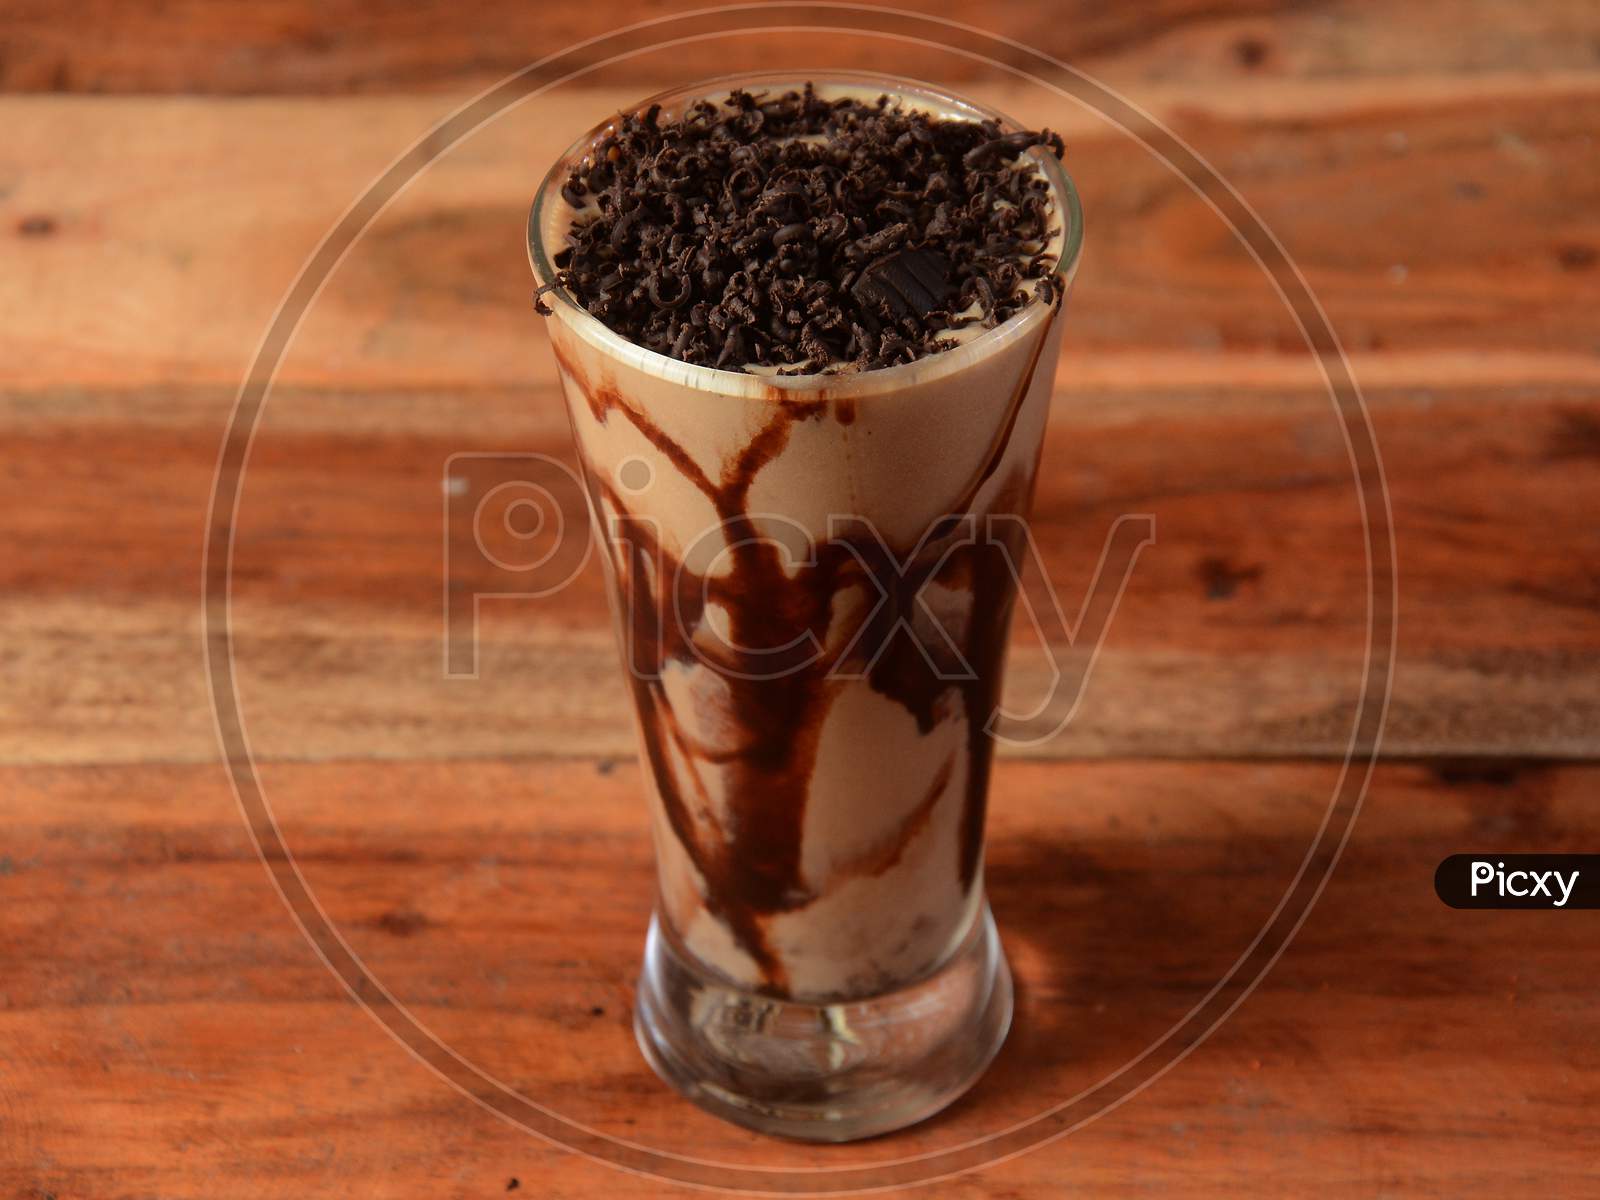 Cold Coffee In A Tall Glass With Chocolate Crushes Poured On A Old Rustic Wooden Table.